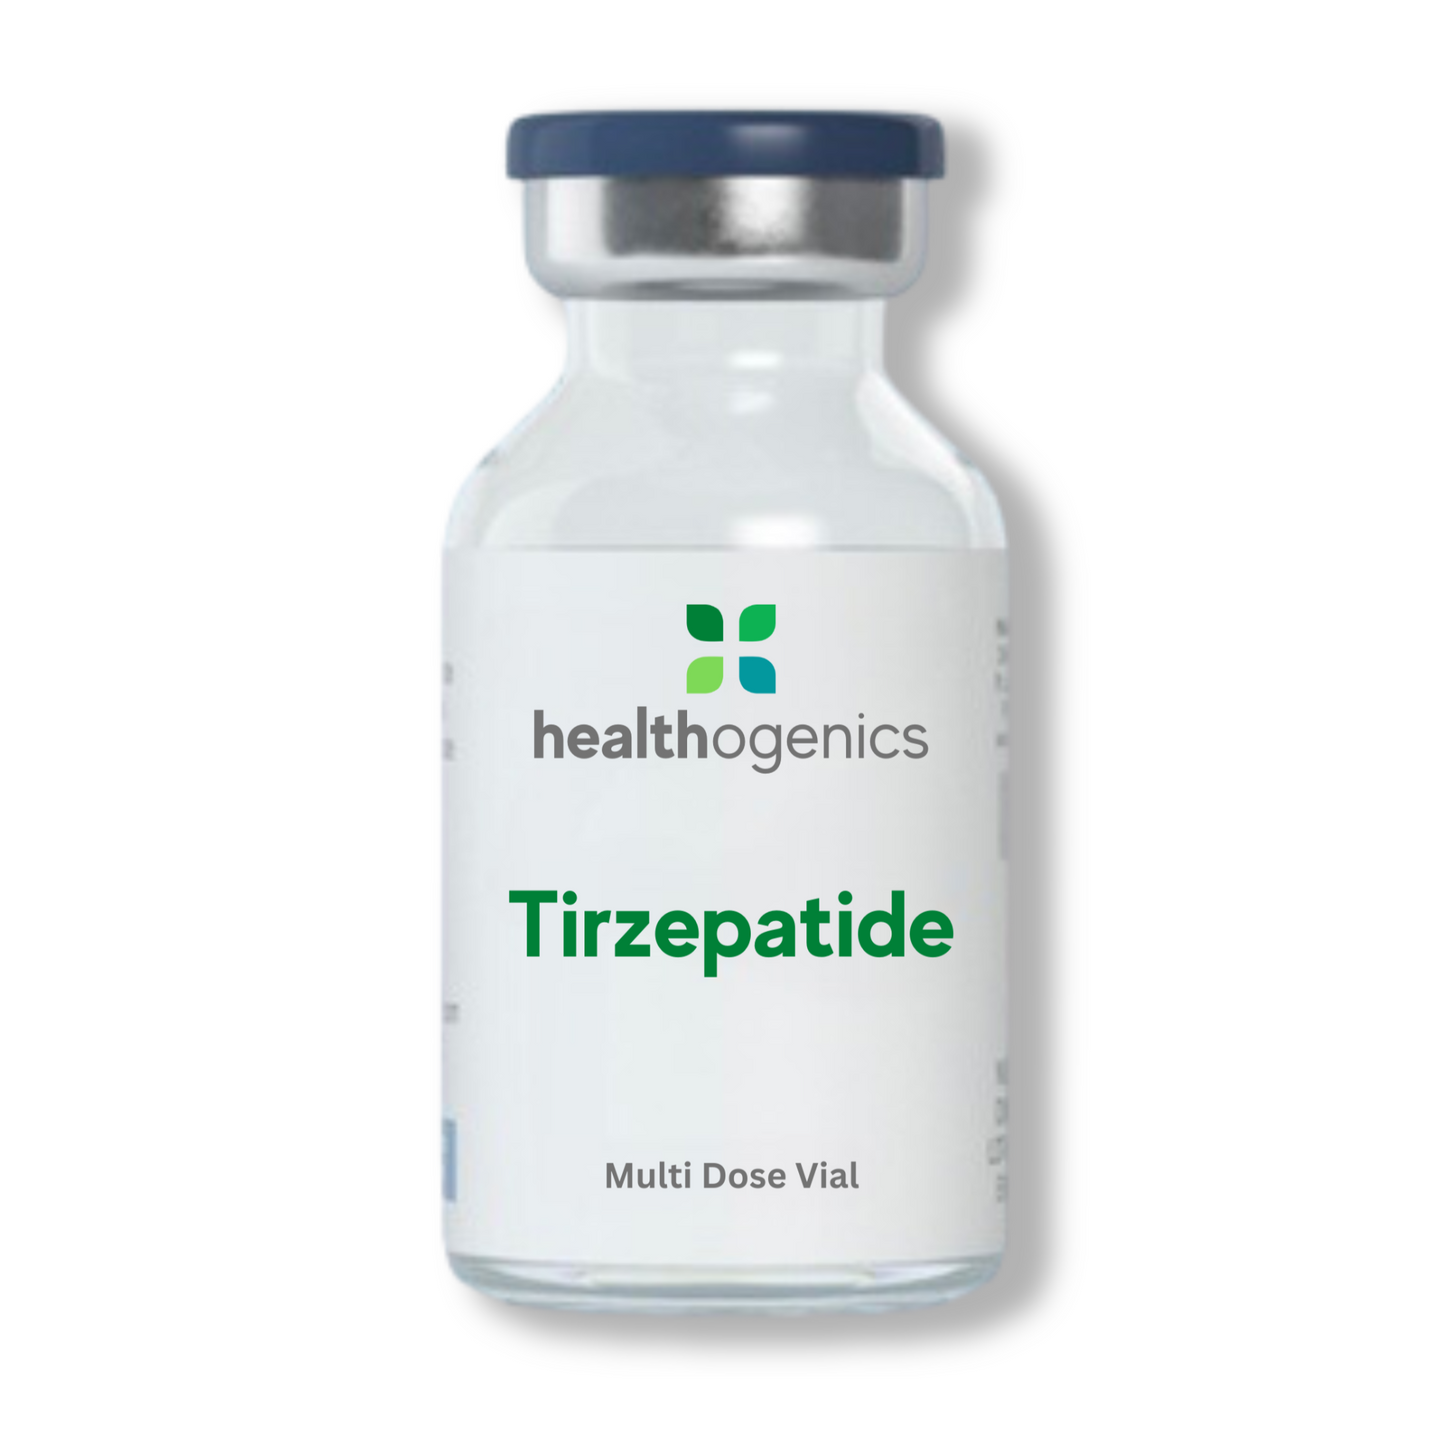 Tirzepatide, Monjaro, weight loss injections, injections, weight loss, fat loss, GLP1, GLP-1, GLP 1